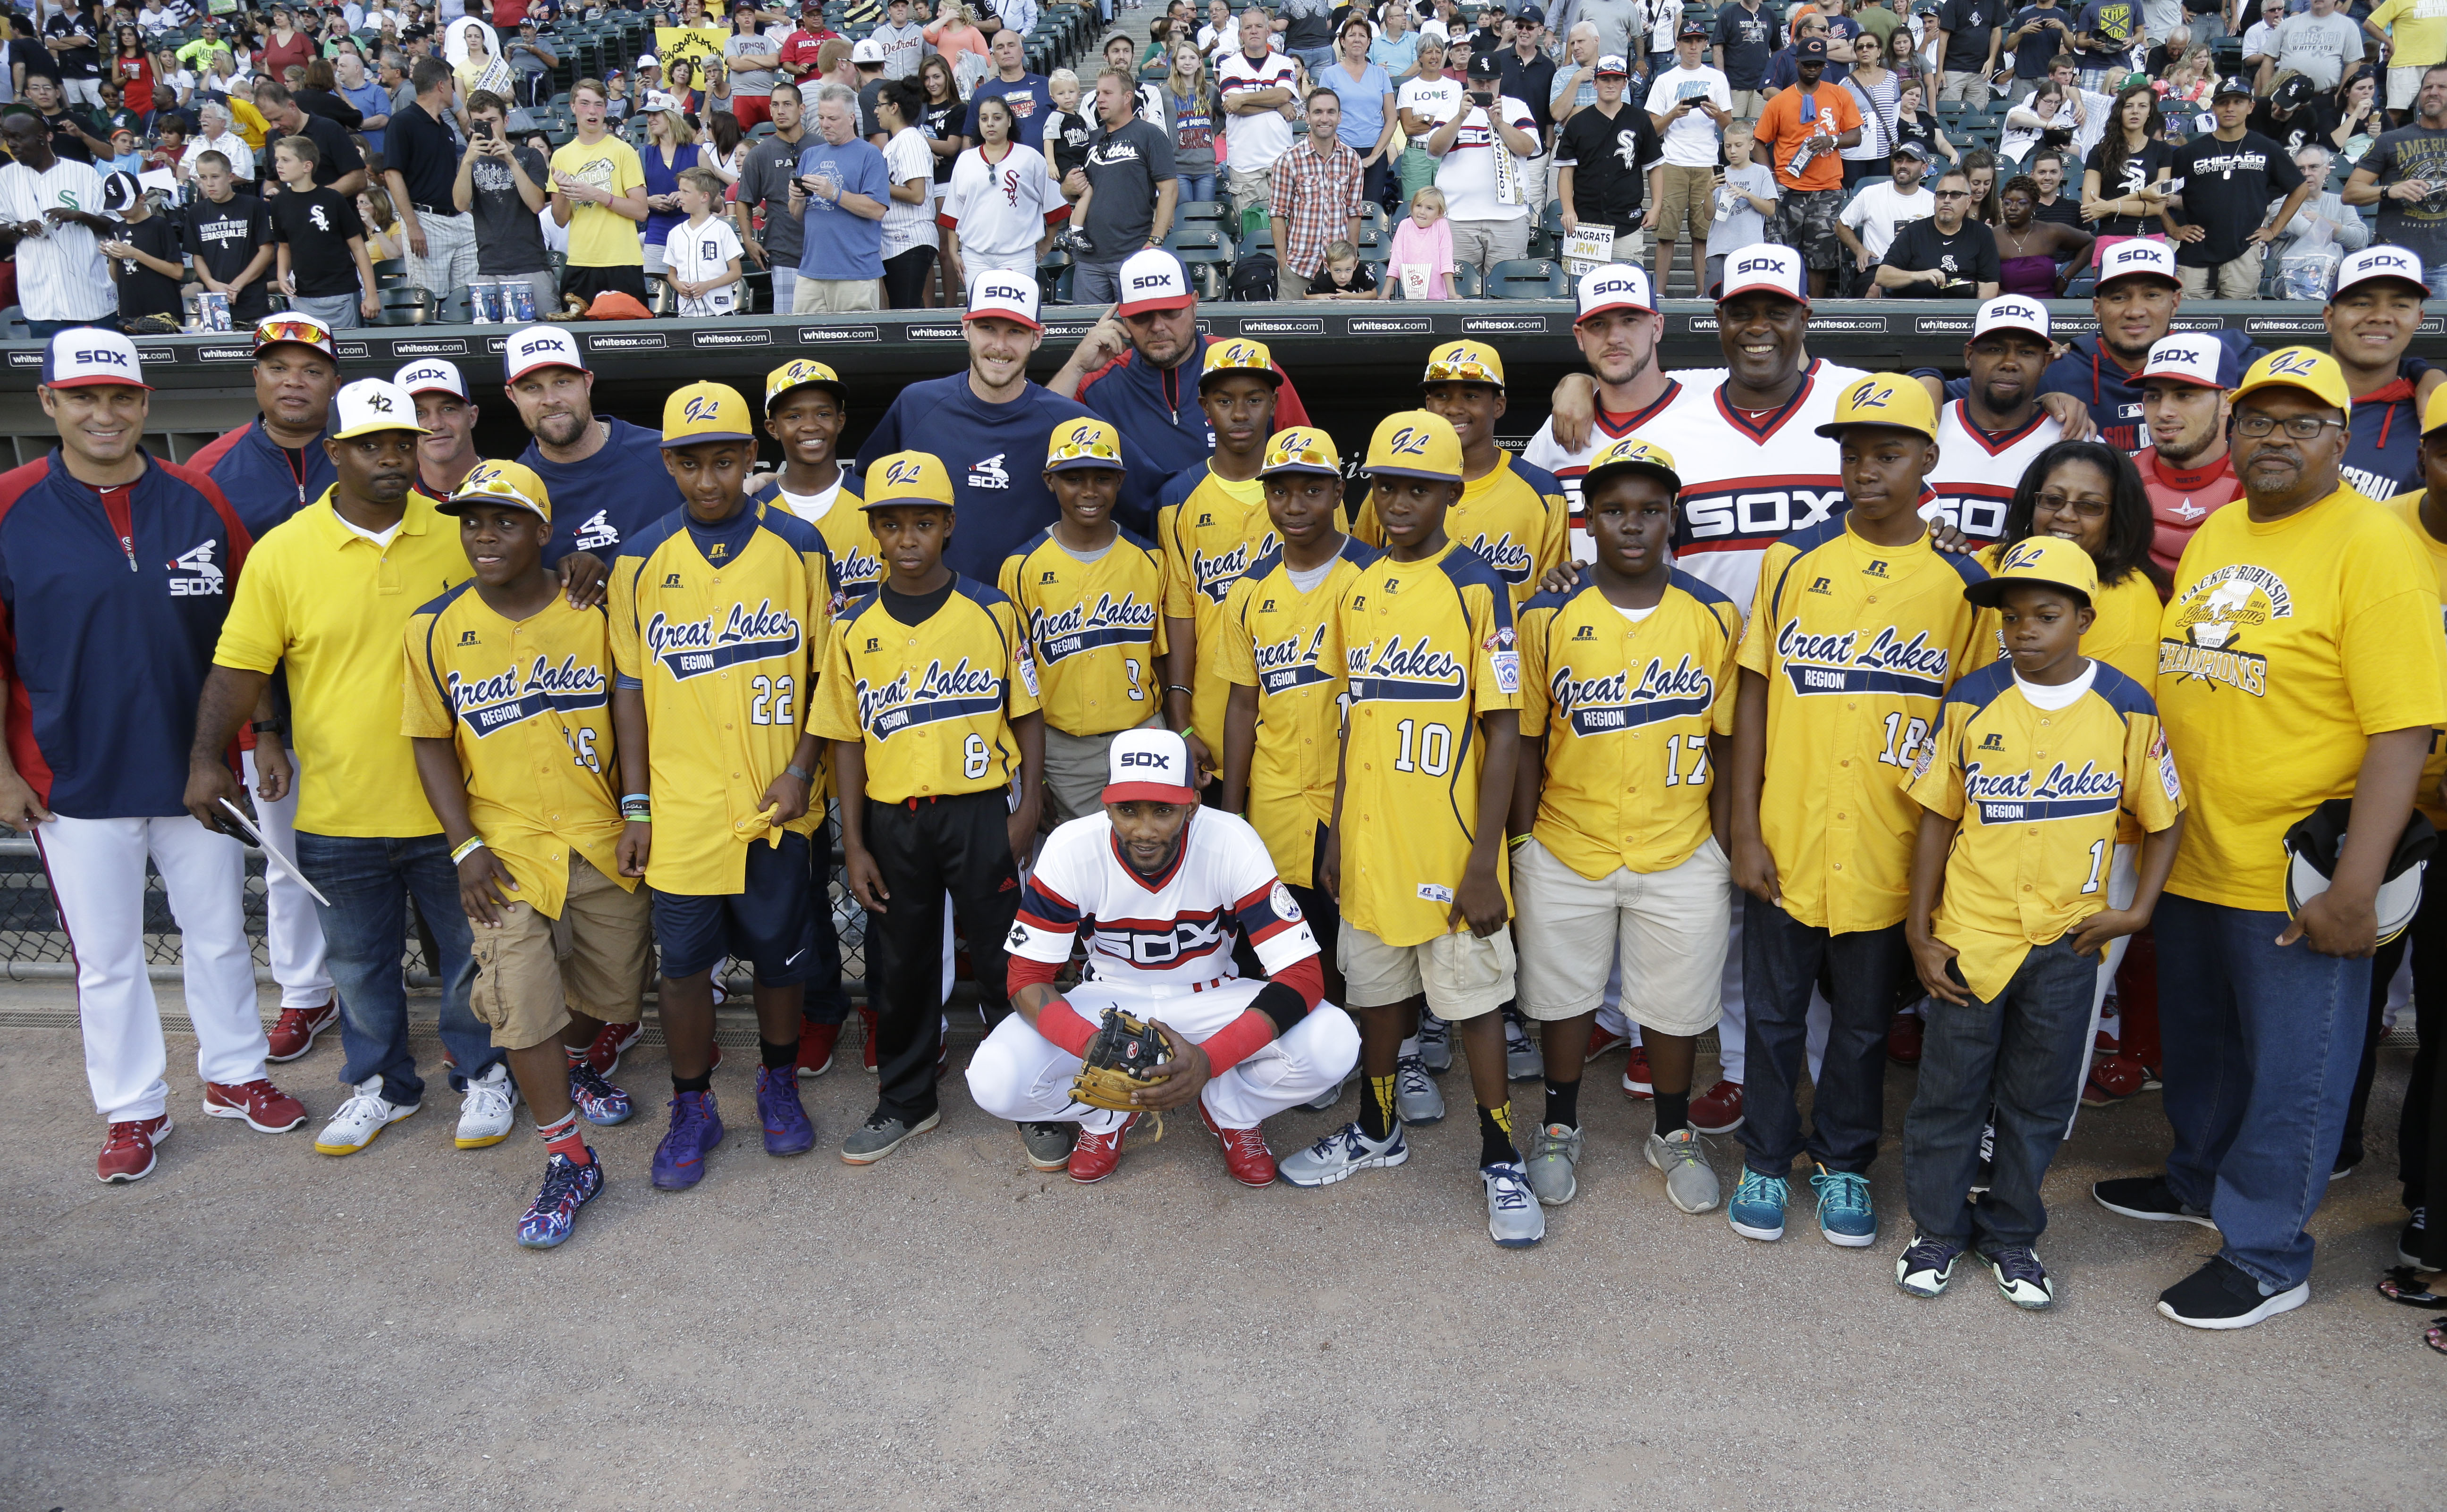 PHOTOS: Jackie Robinson West All-Stars honored at U.S. Cellular